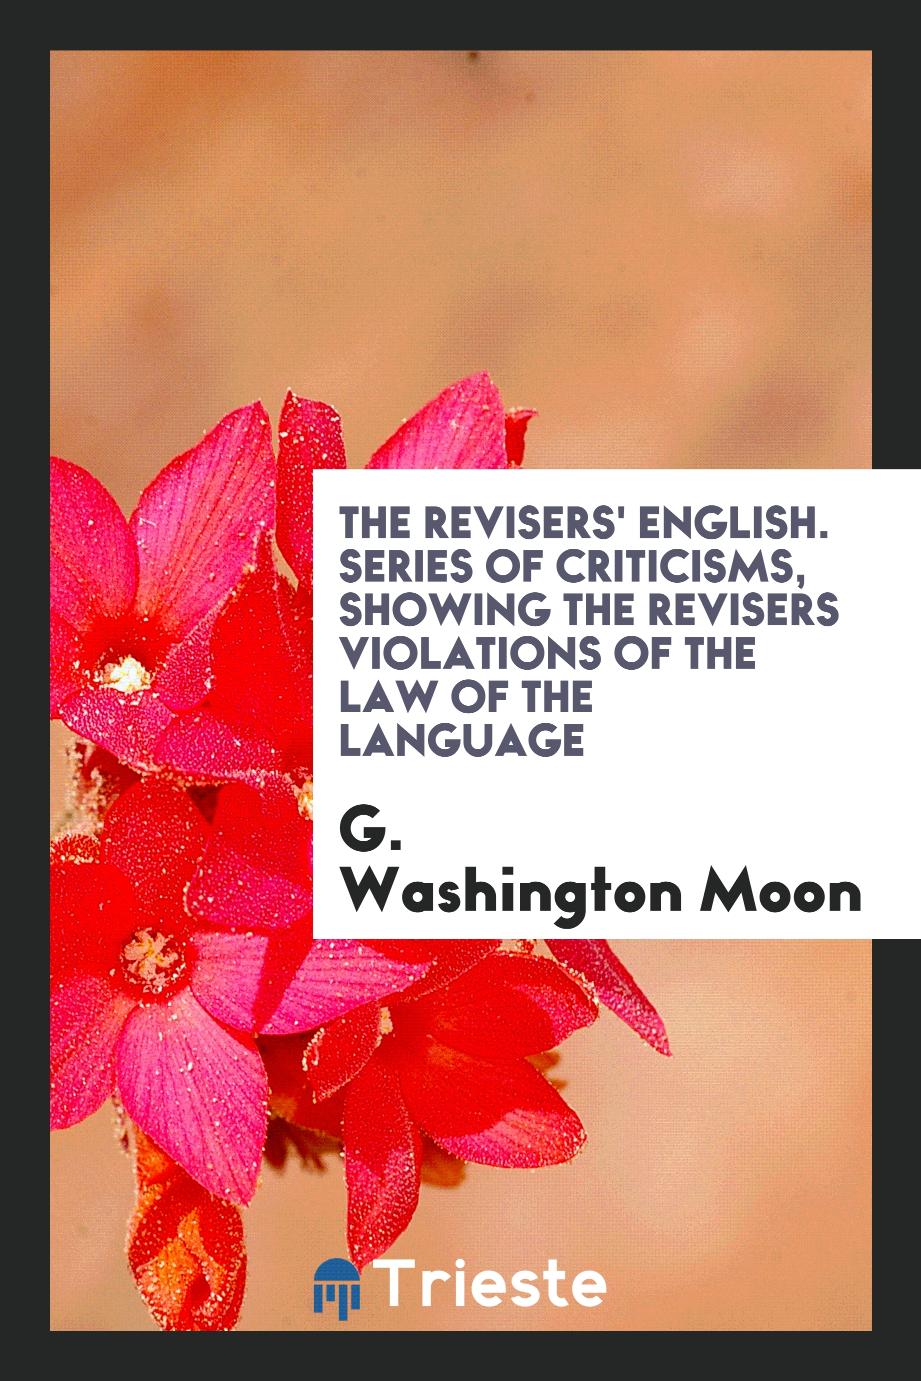 The Revisers' English. Series of Criticisms, Showing the Revisers Violations of the Law of the Language